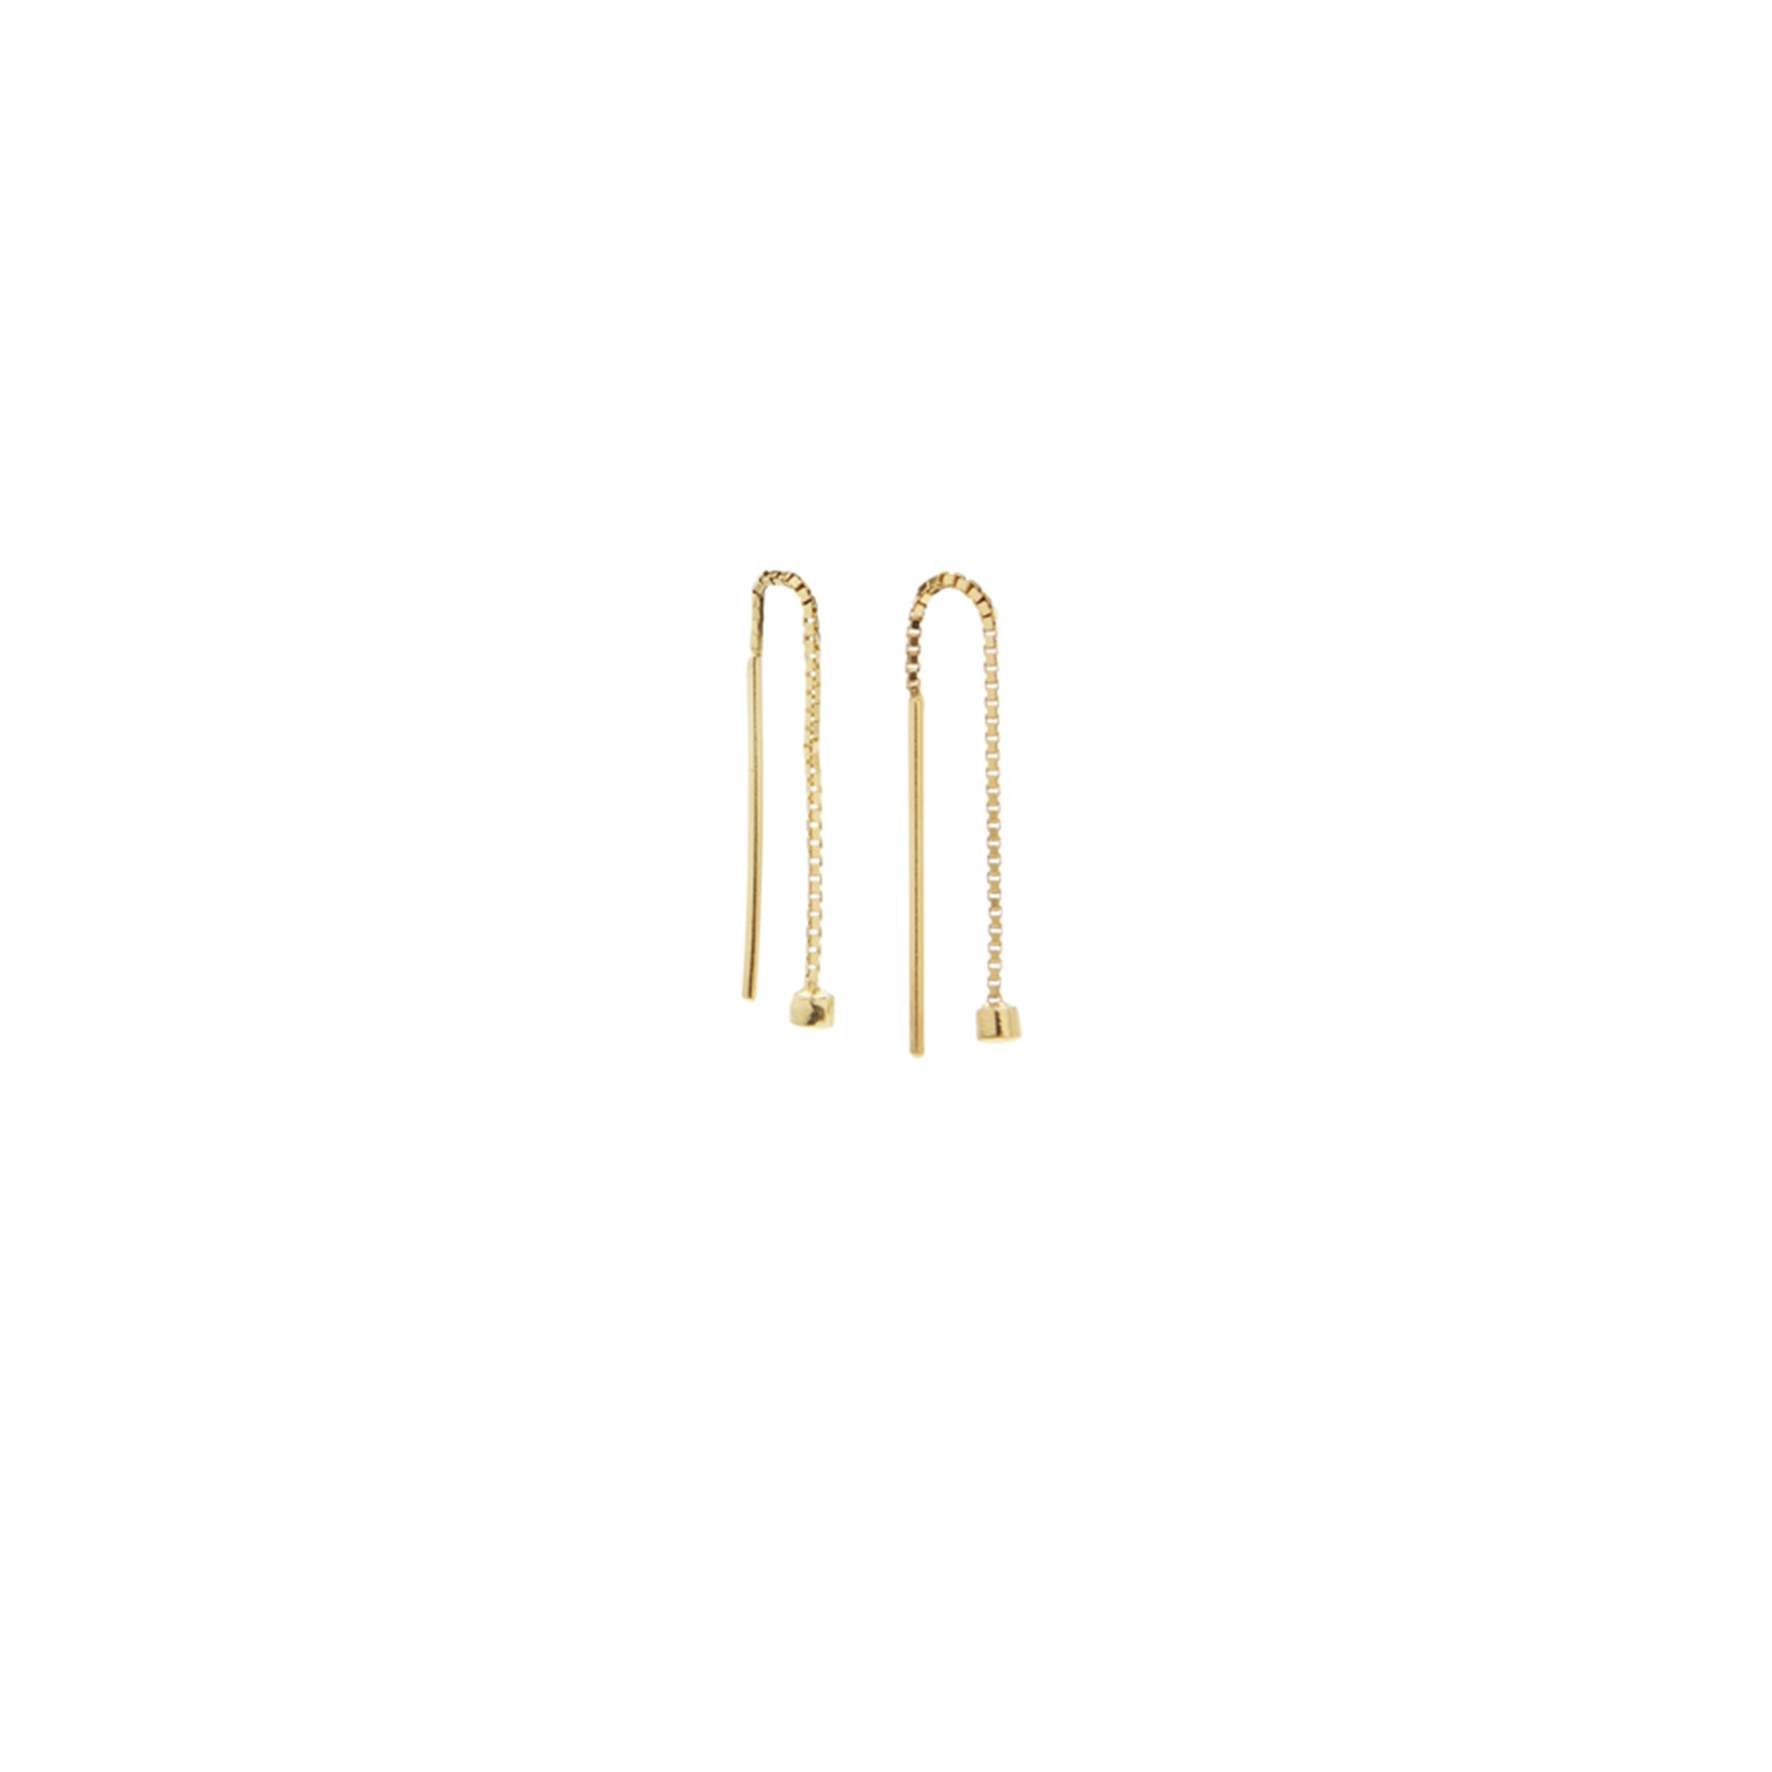 Crystal Chain Earrings from Pico in Goldplated-Silver Sterling 925